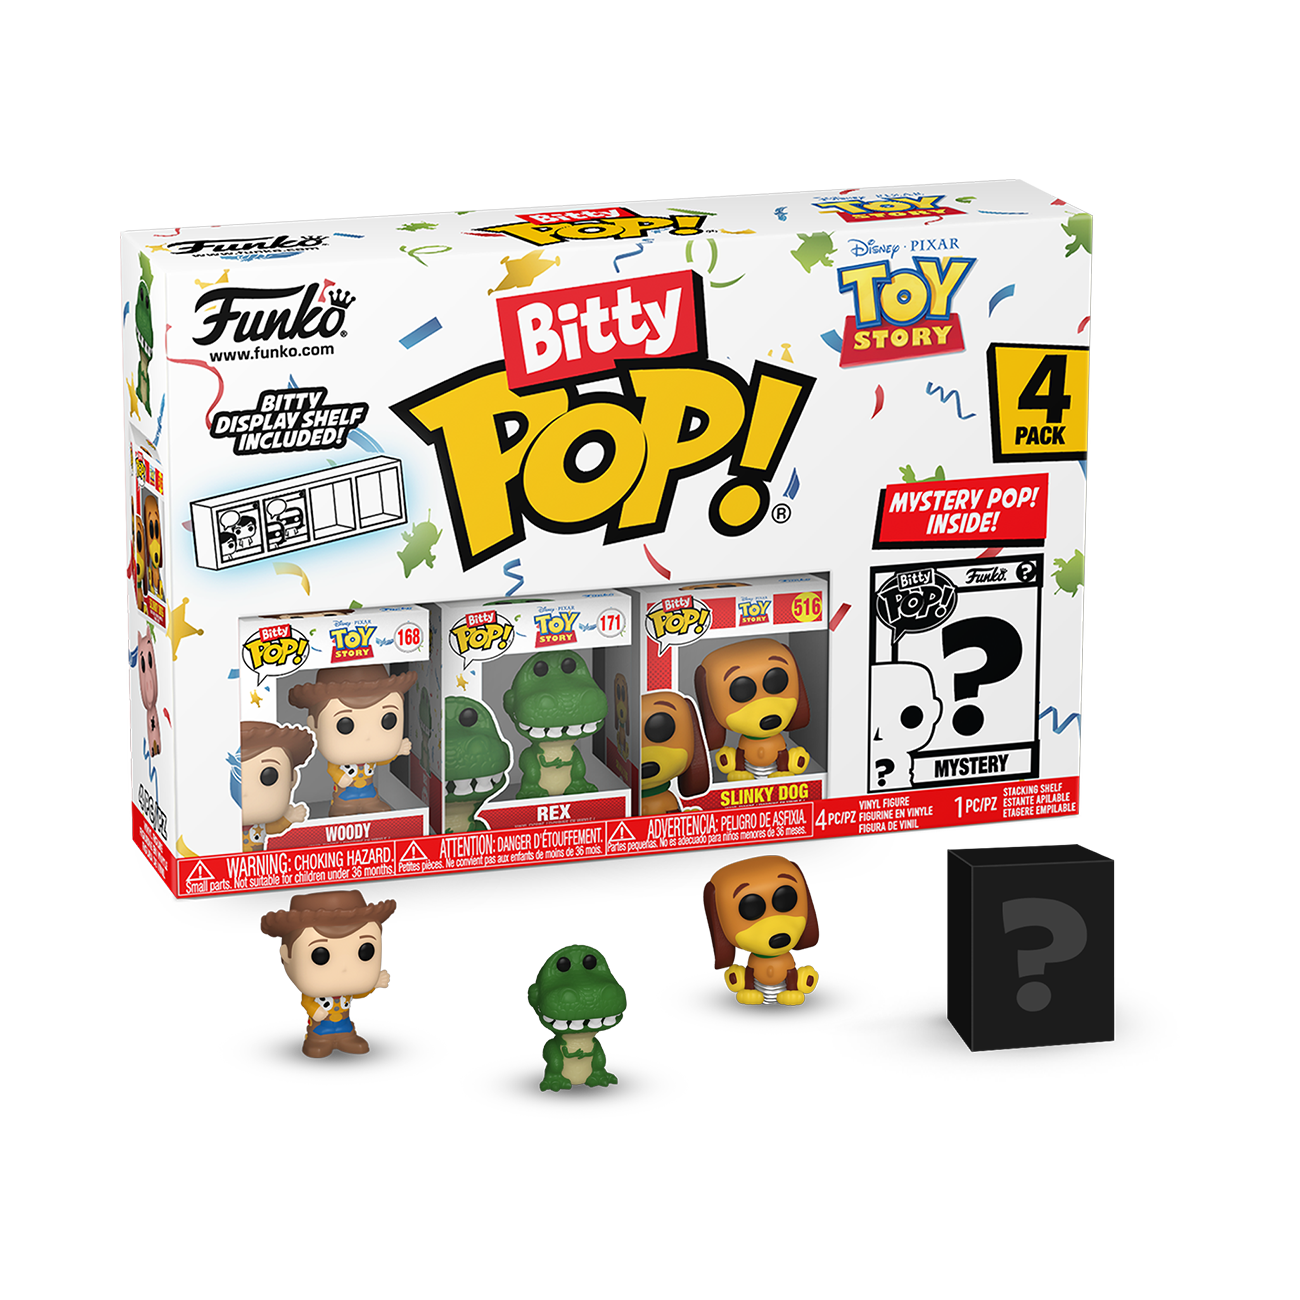 Funko BITTY POP! Toy Story 4-Pack Series 3